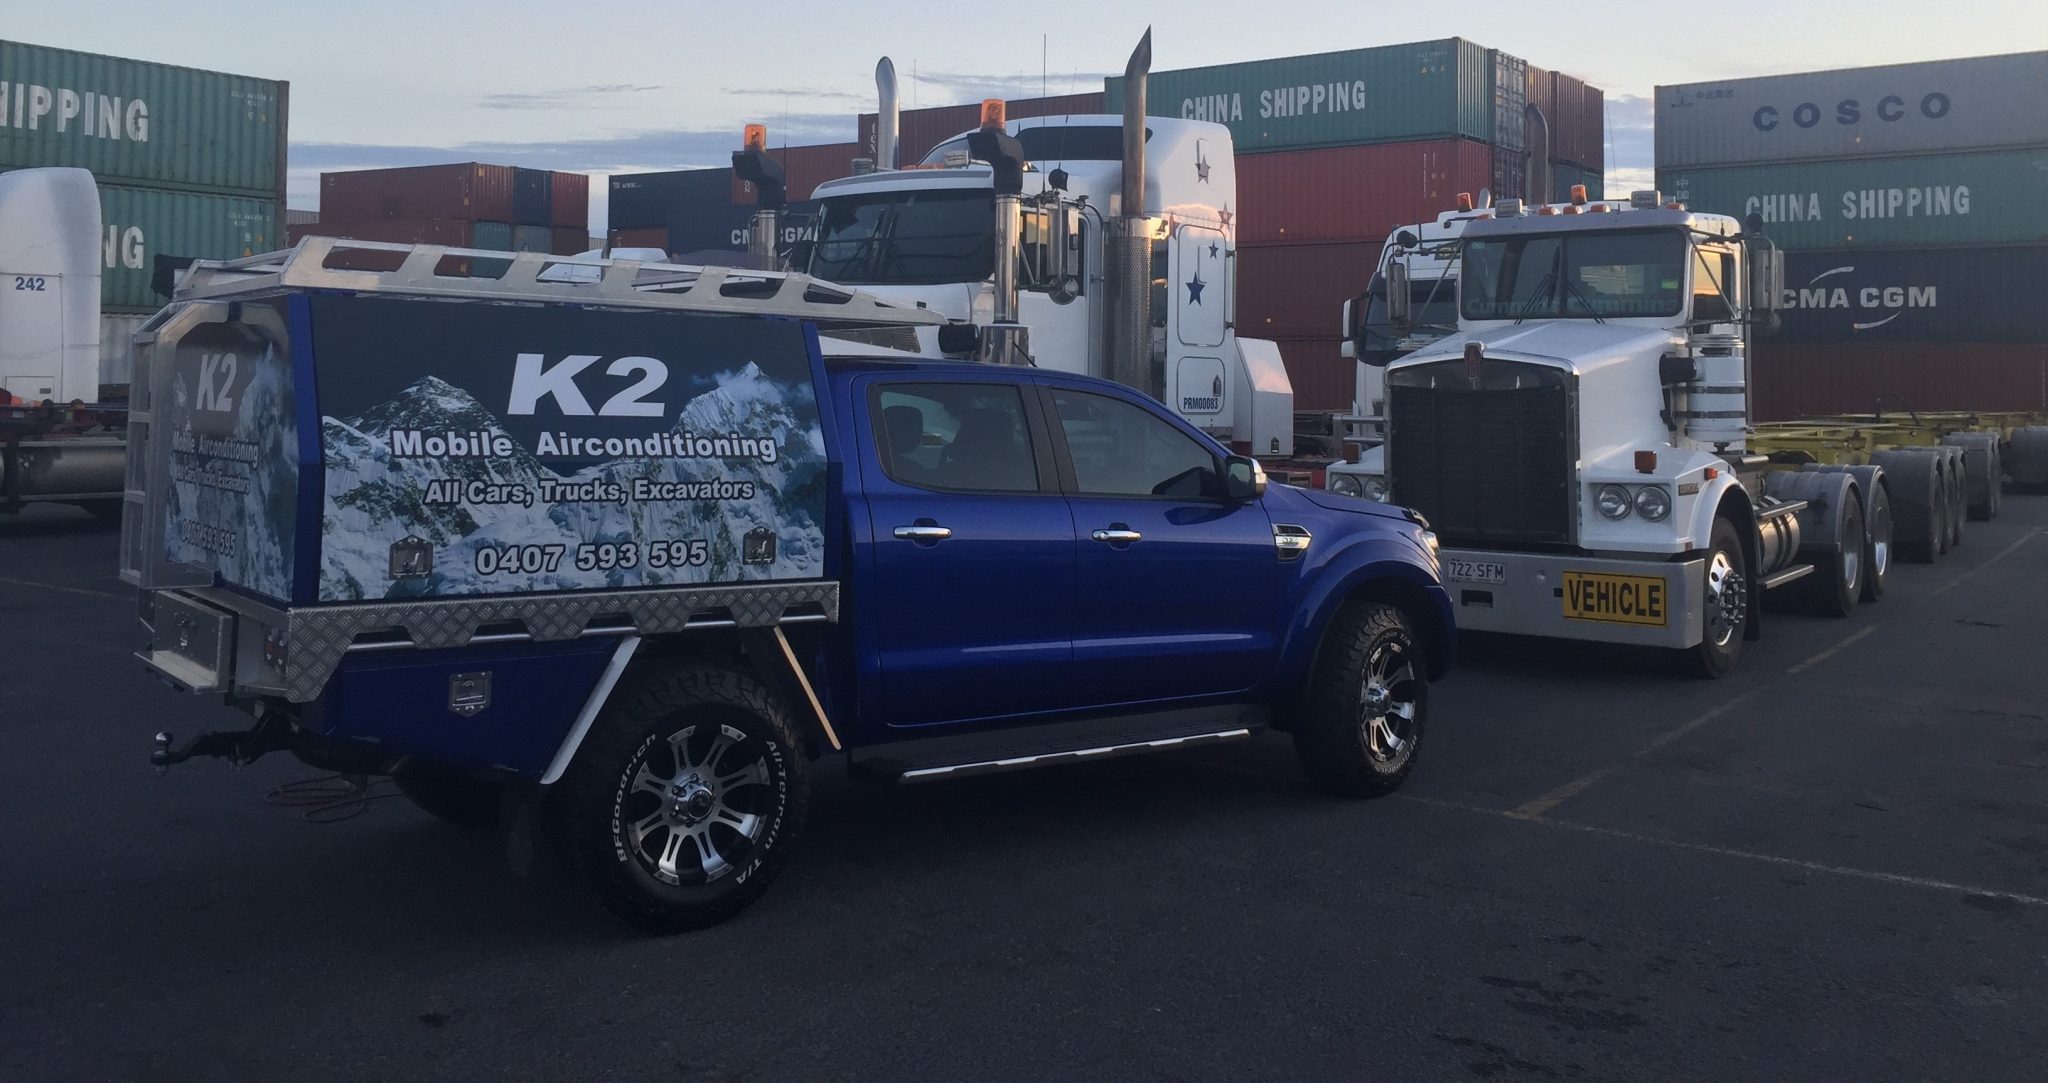 K2 Mobile Airconditioning